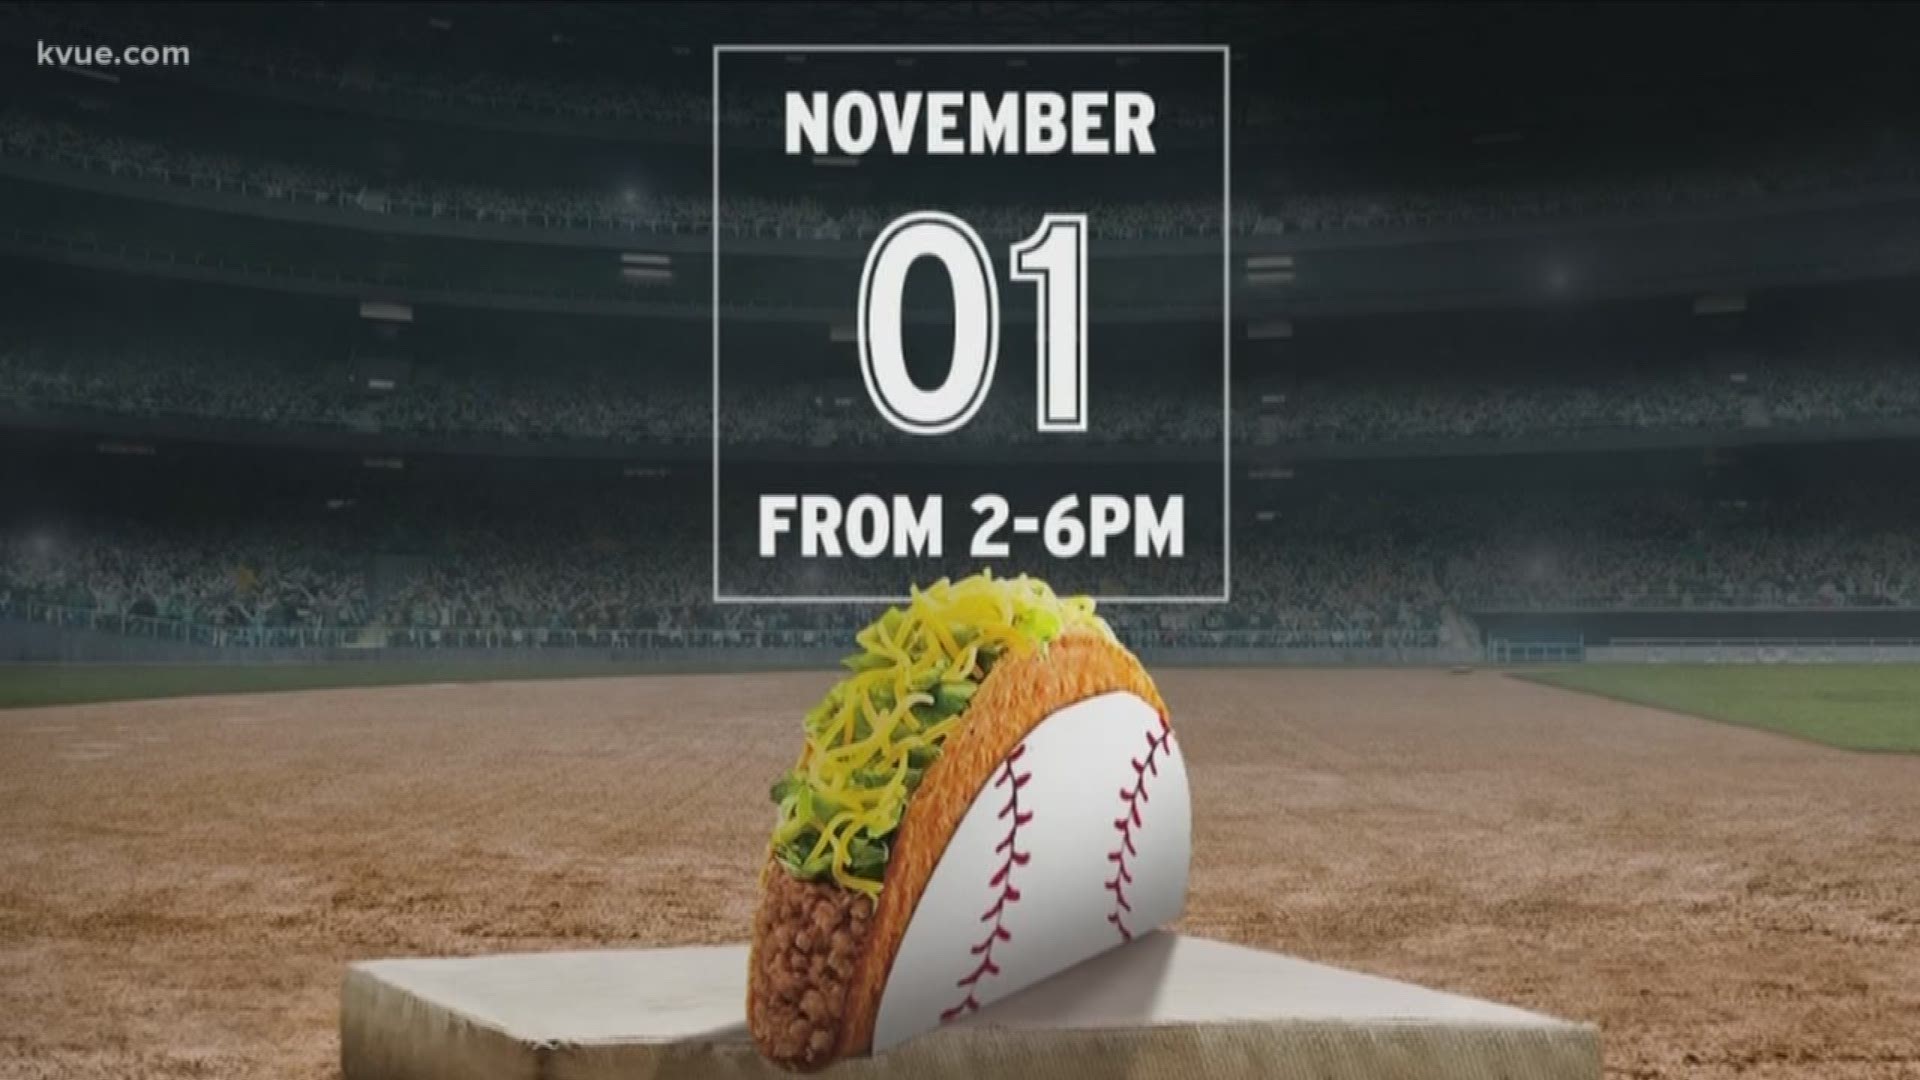 The chain is giving away free Doritos locos tacos after someone stole a base during the World Series.